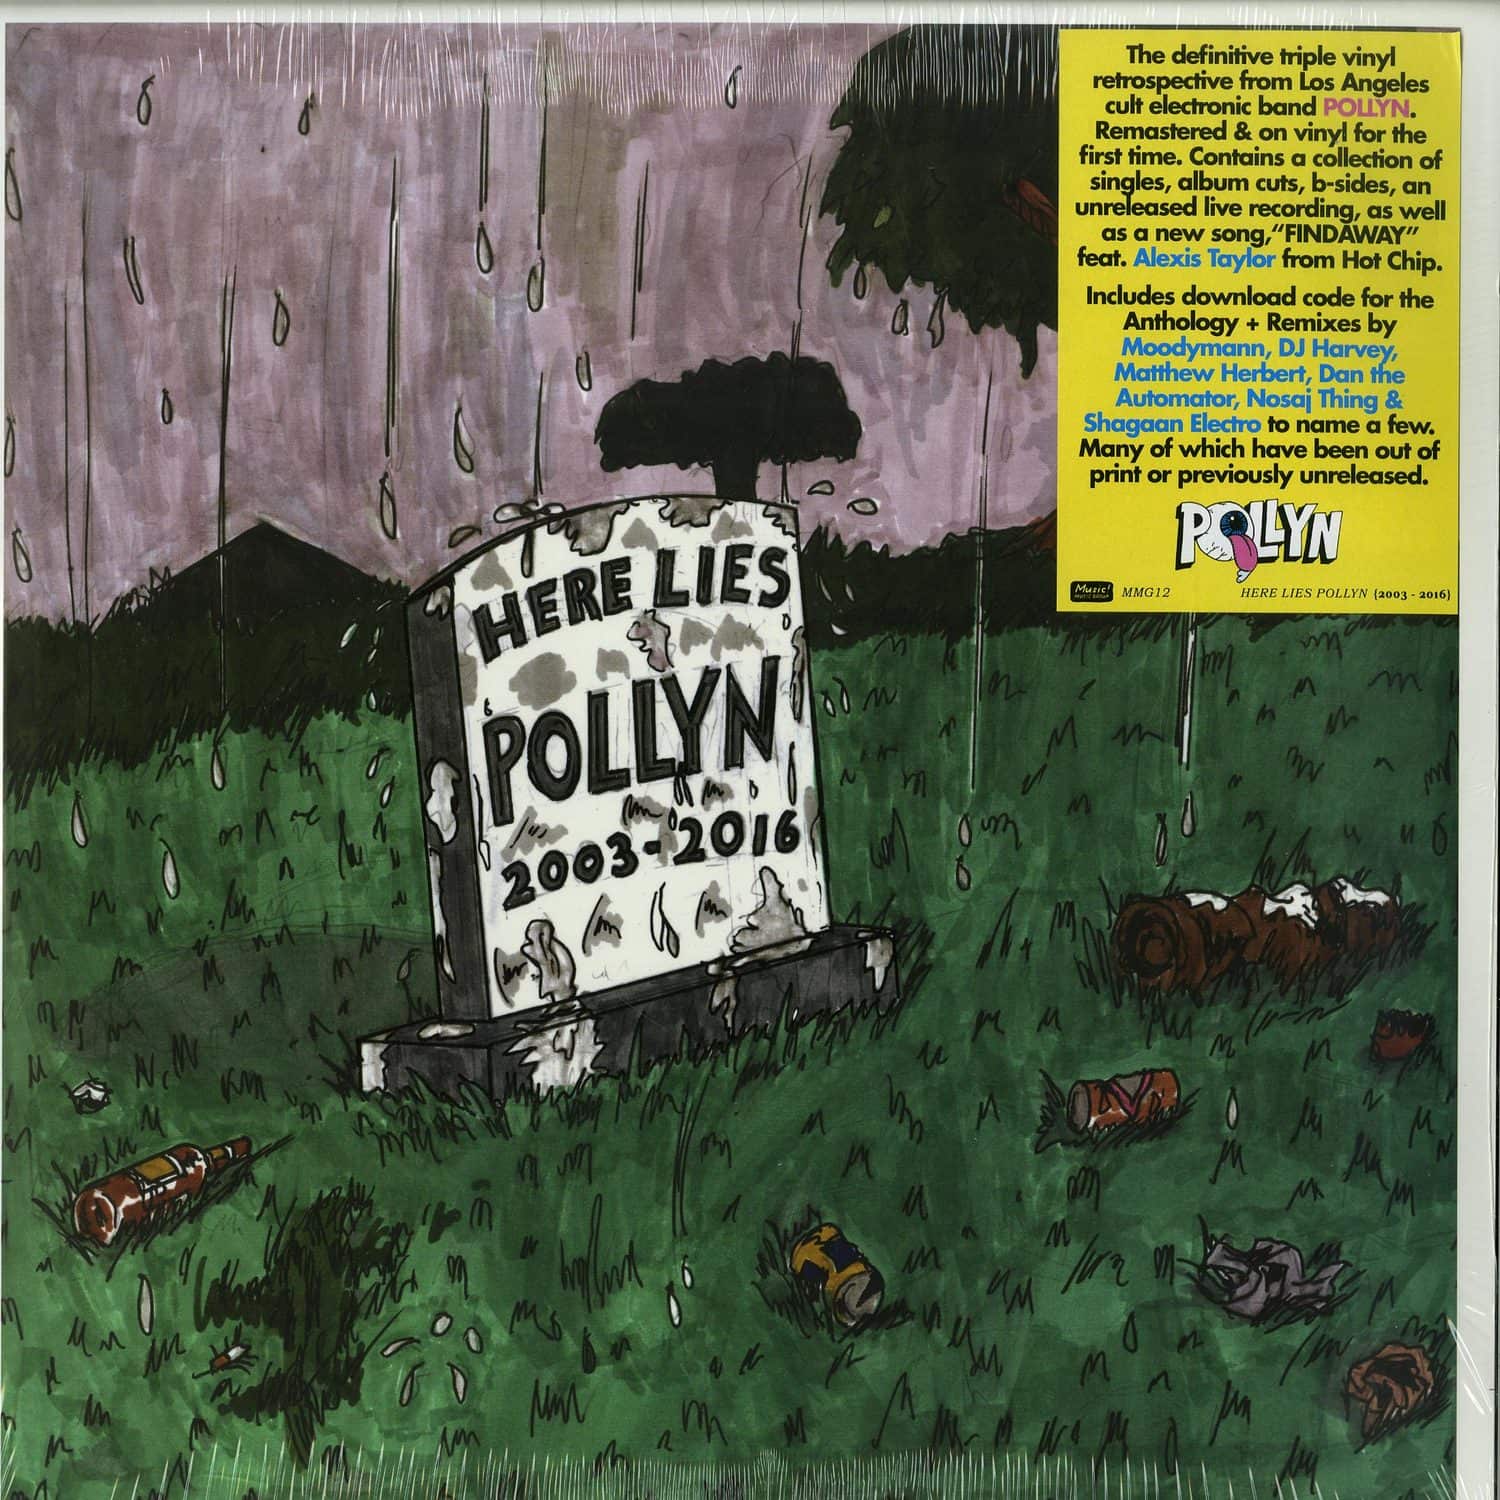 Pollyn - HERE LIES POLLYN / ANTHOLOGY 2003-2016 